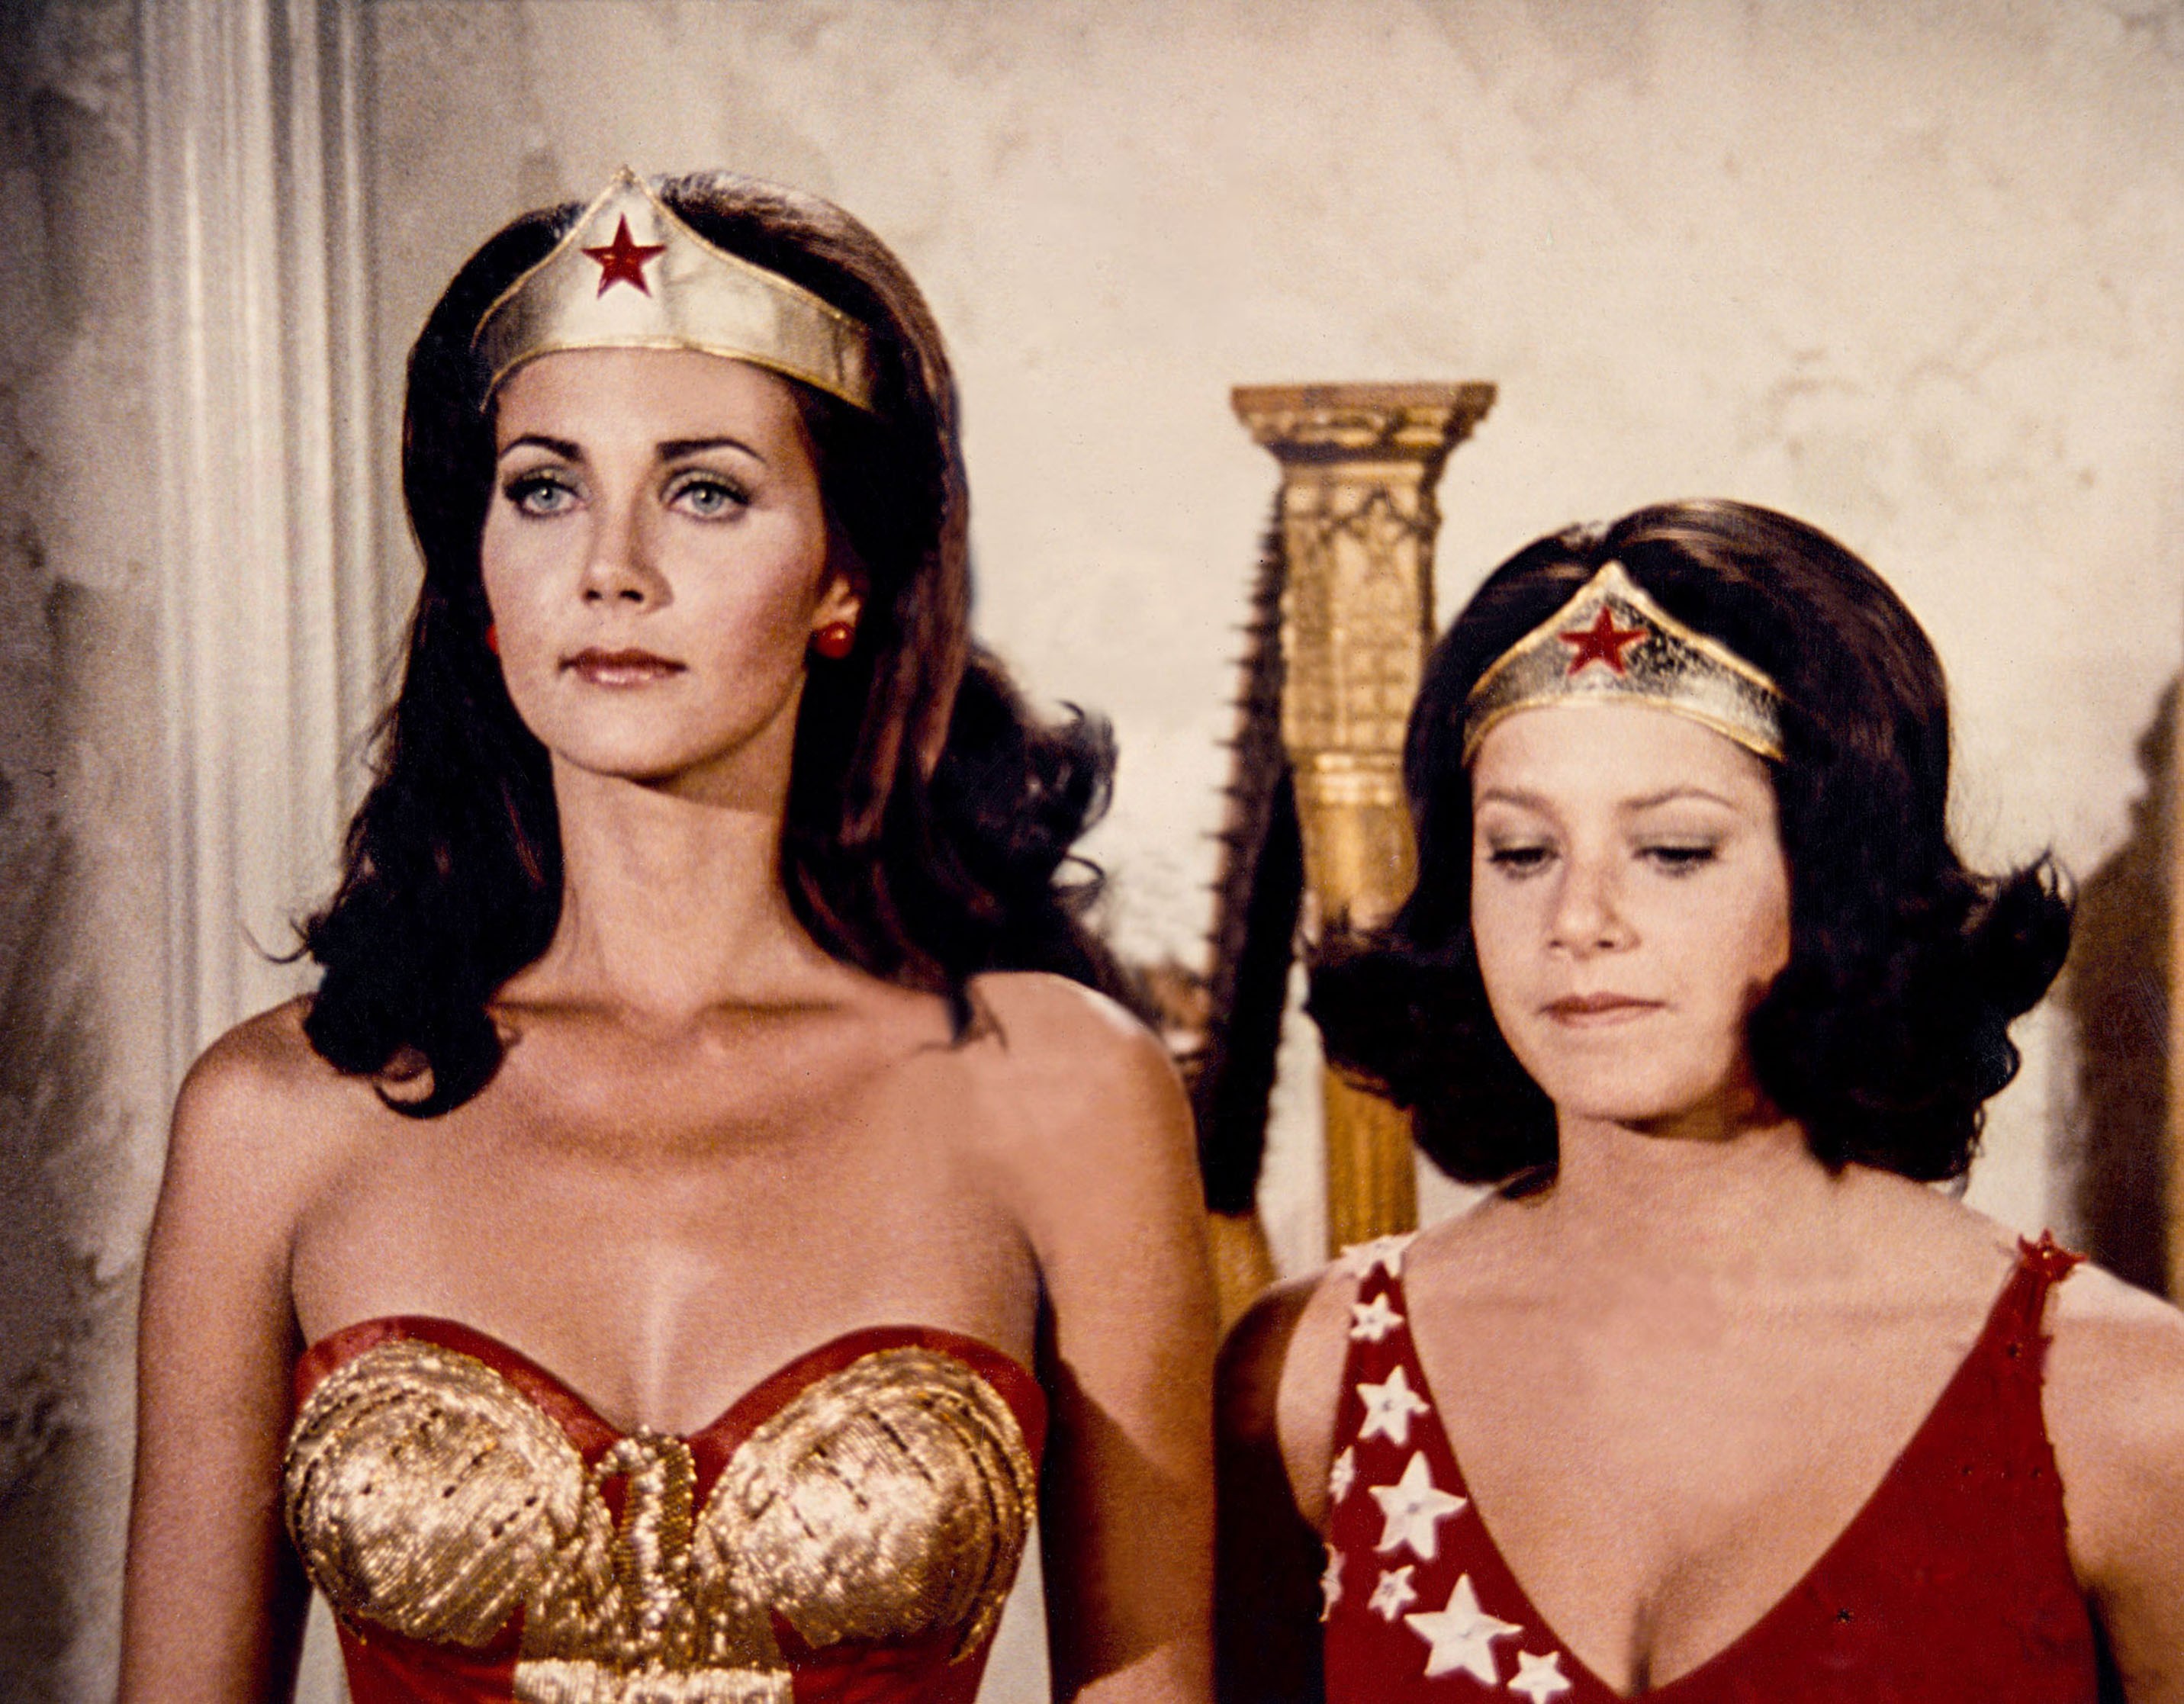 angela guilford recommends pics of lynda carter as wonder woman pic